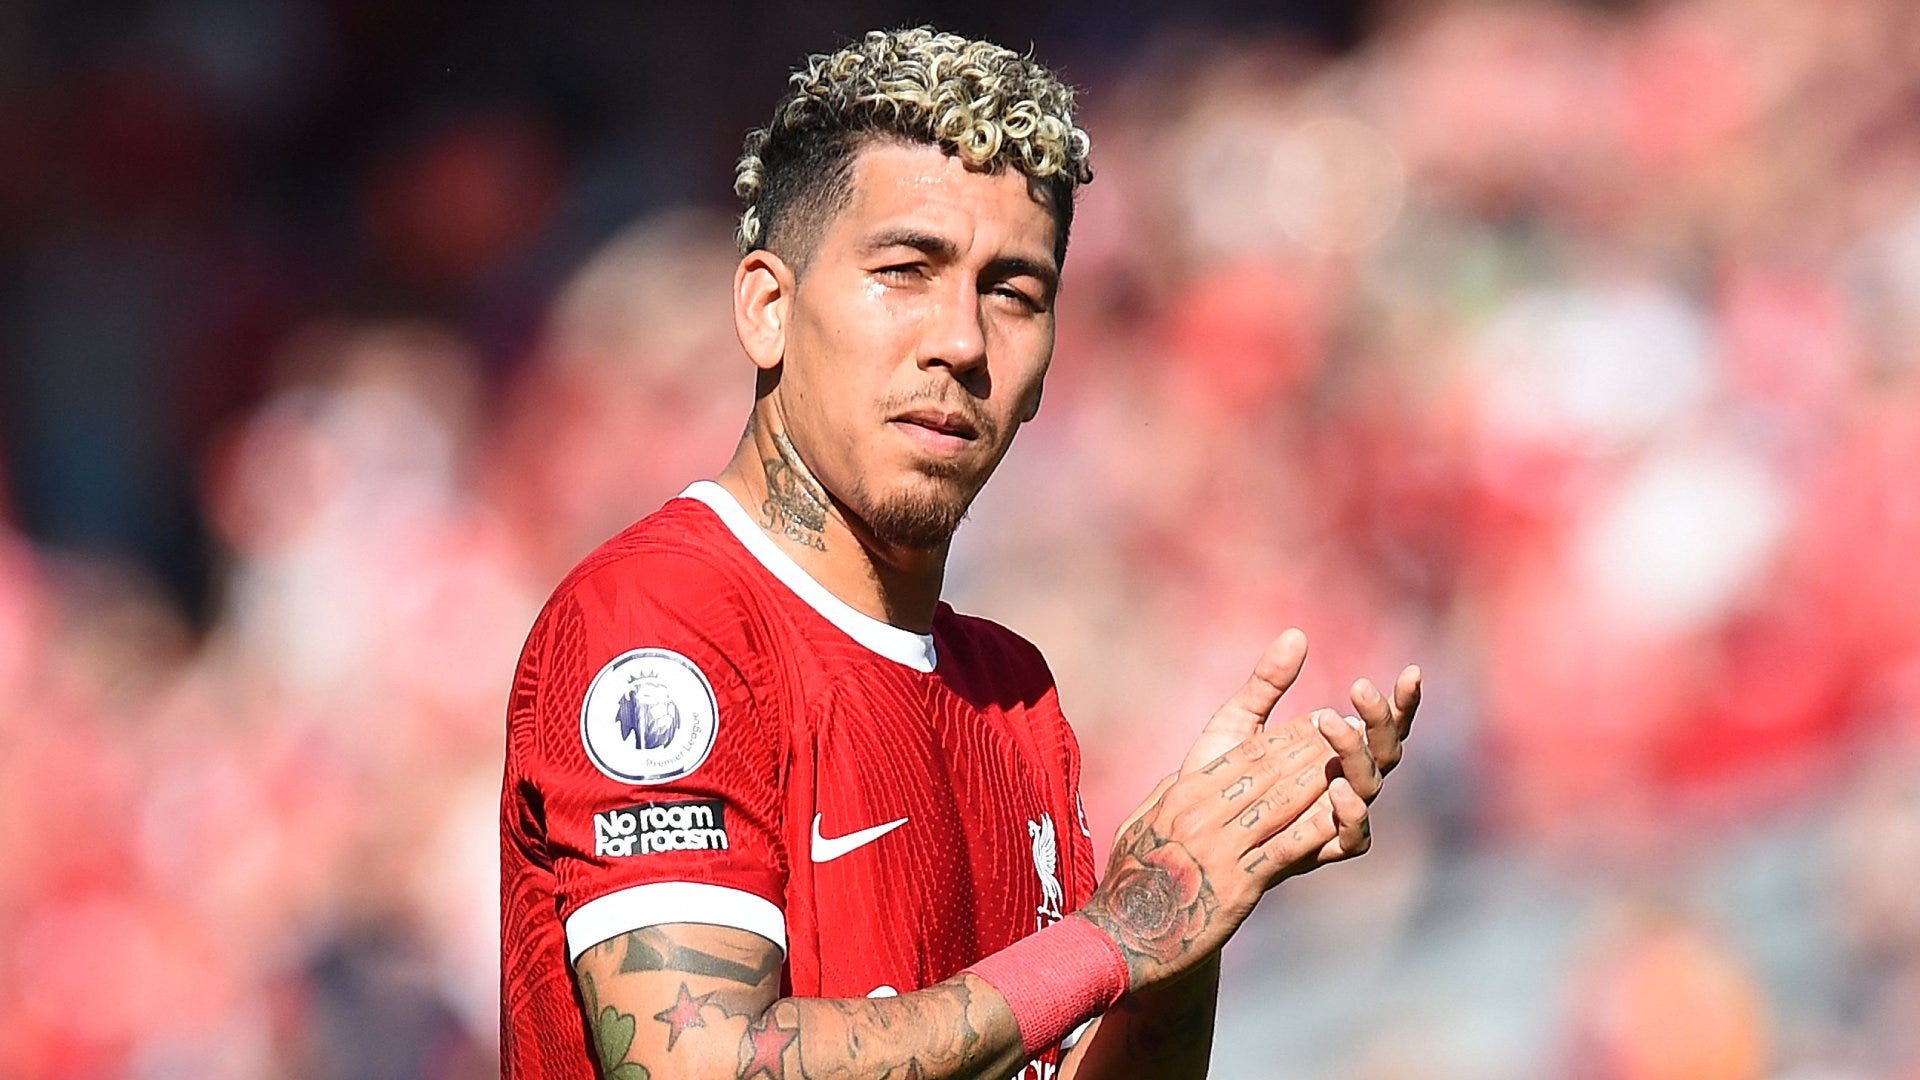 Roberto Firmino in tears and is consoled by Liverpool team-mates after  Brazilian plays his final game at Anfield | Goal.com US